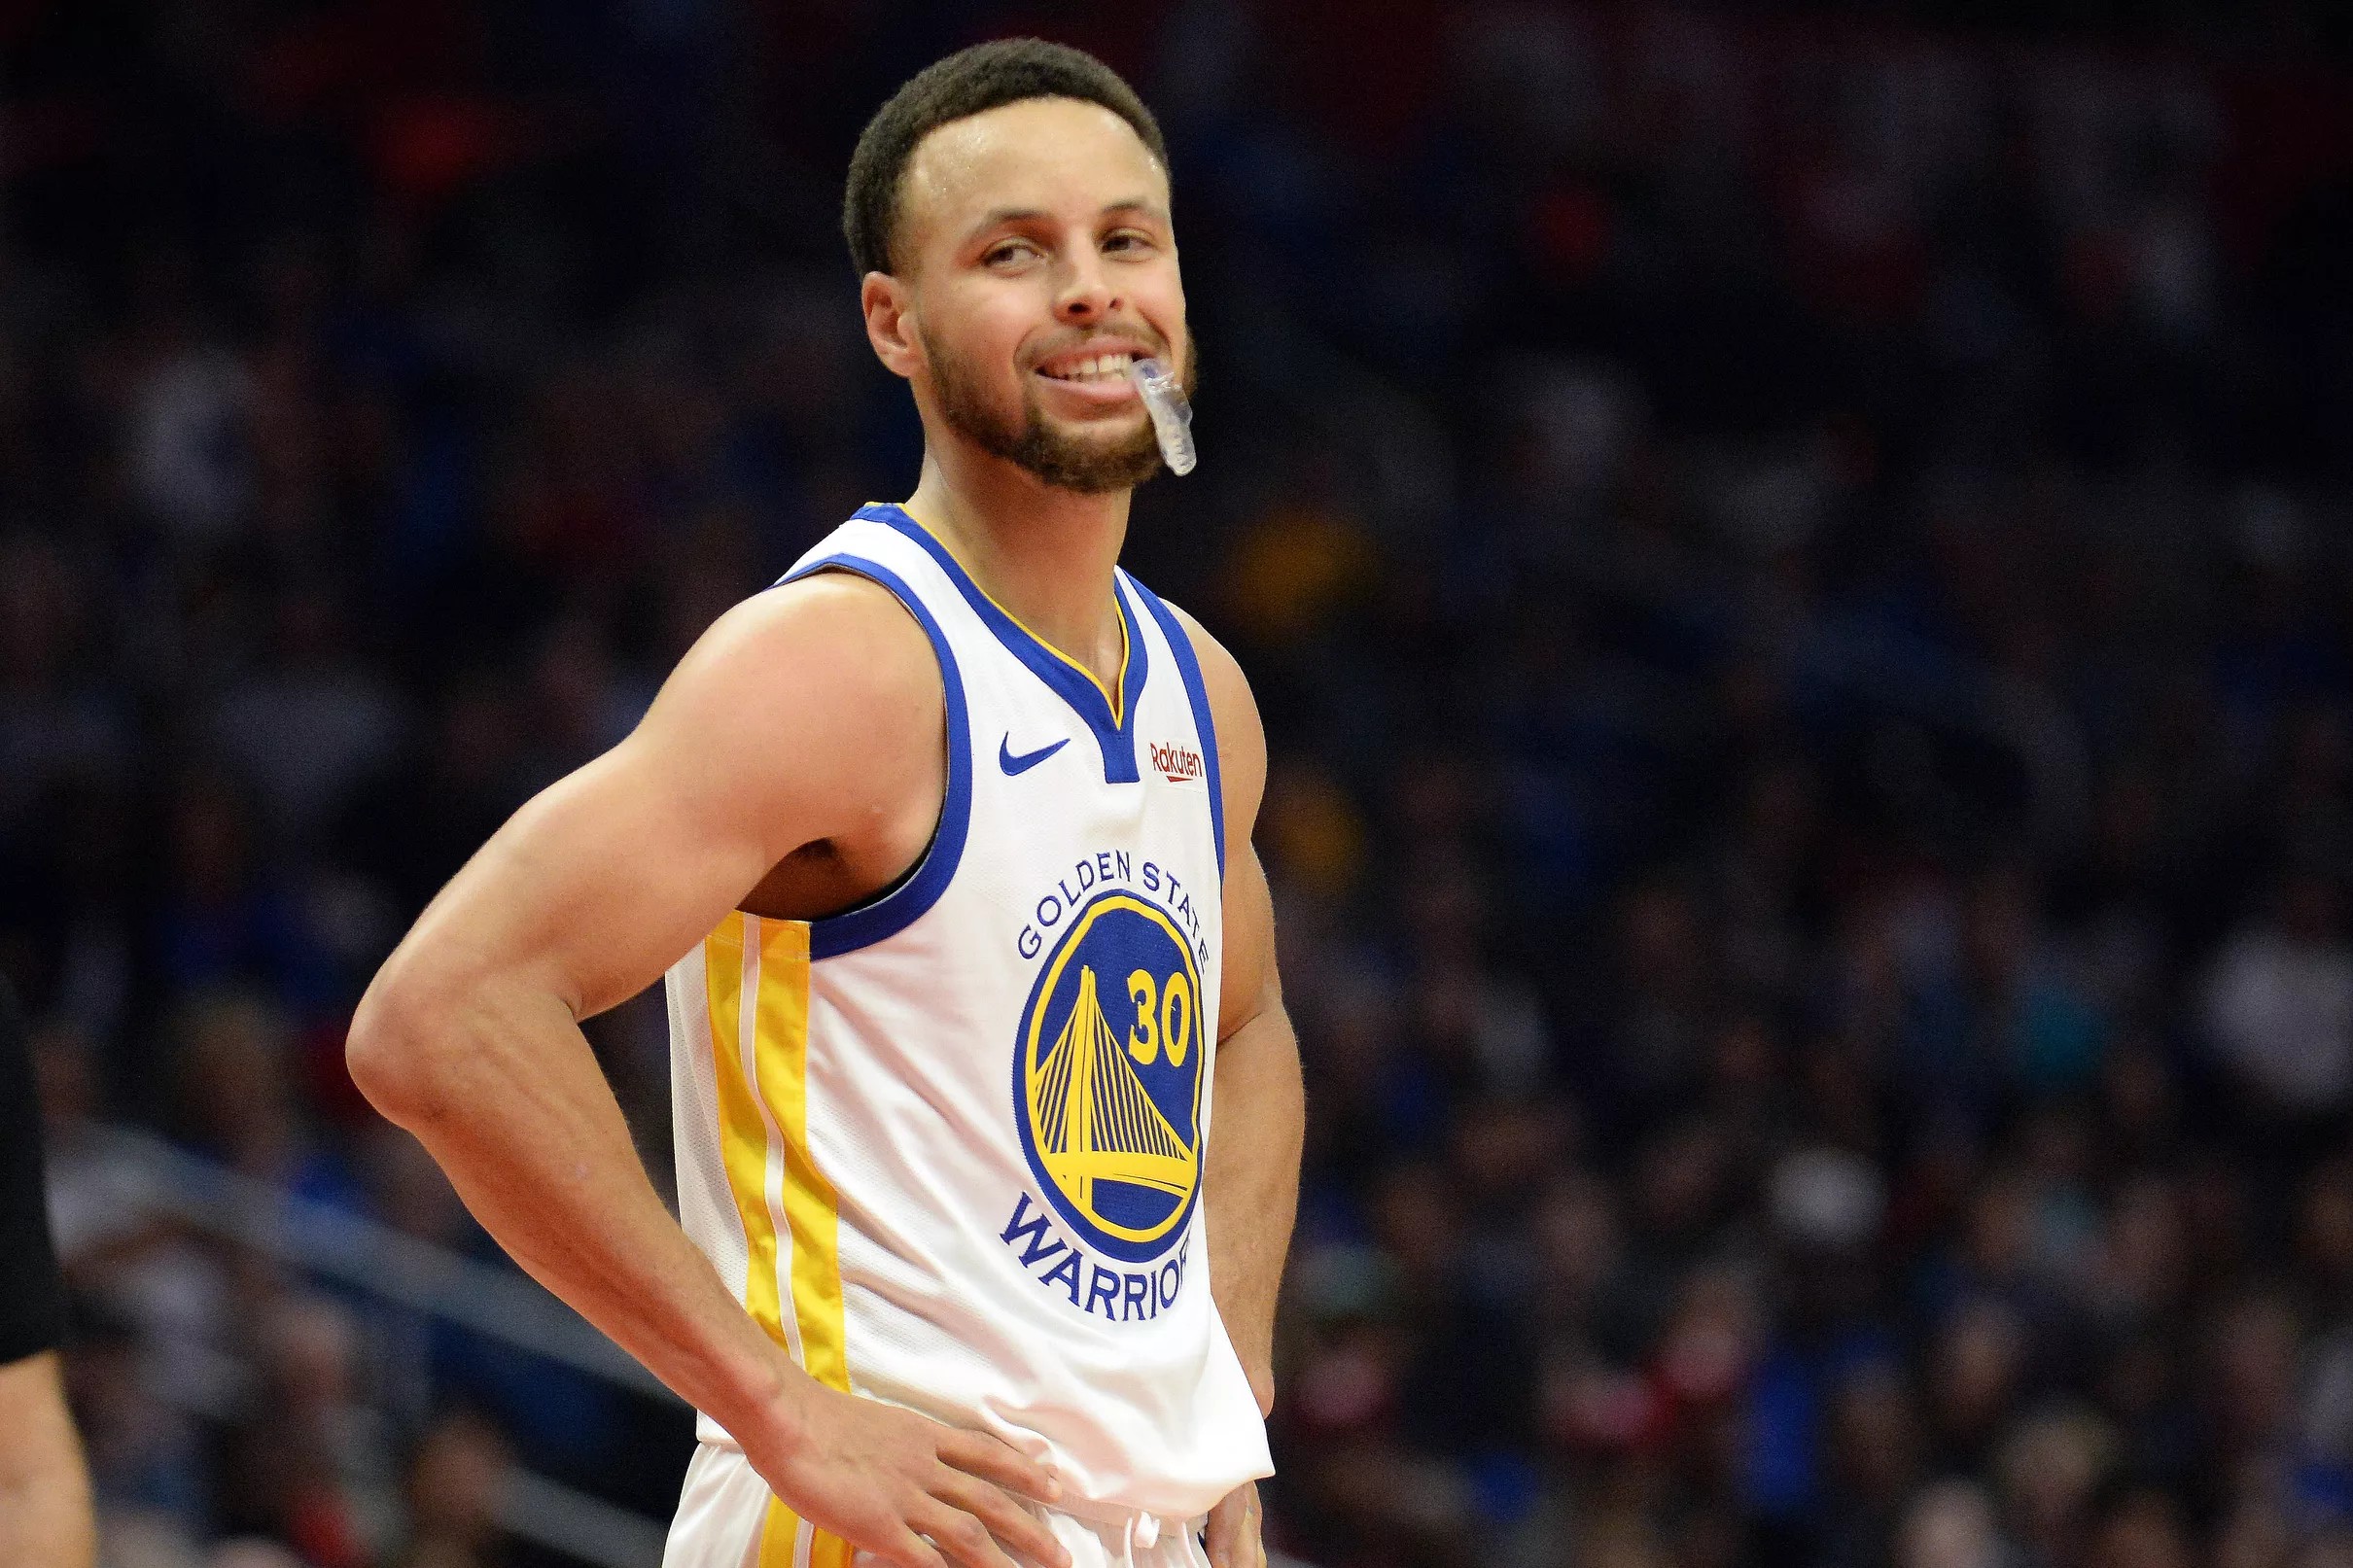 Steph Curry had the second-most popular jersey this year